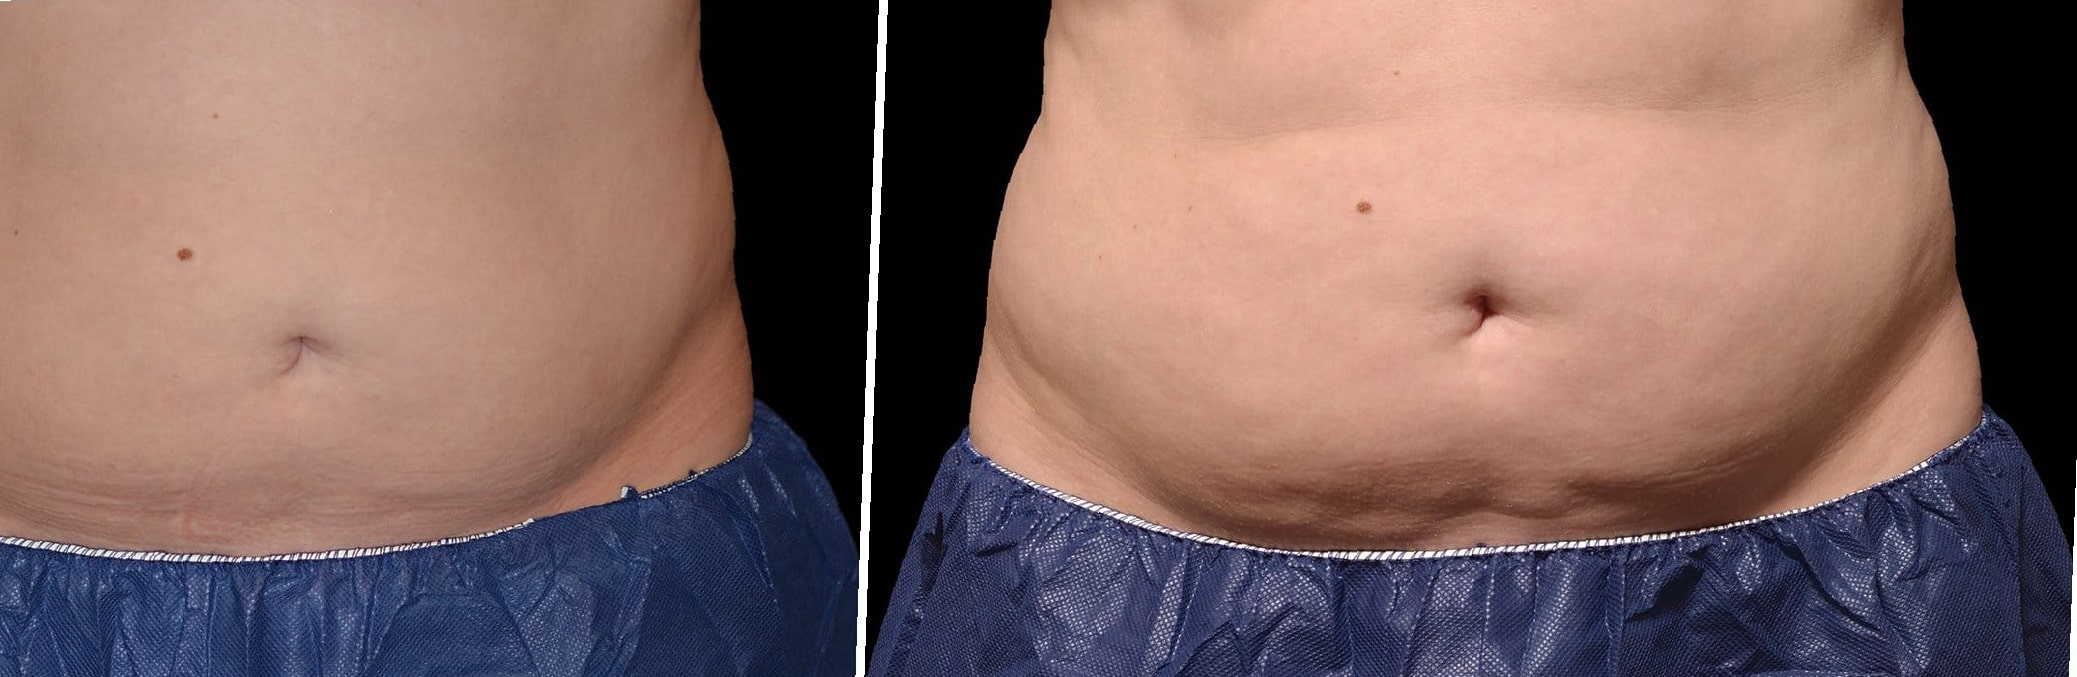 coolsculpting-before-and-after-stomach-2